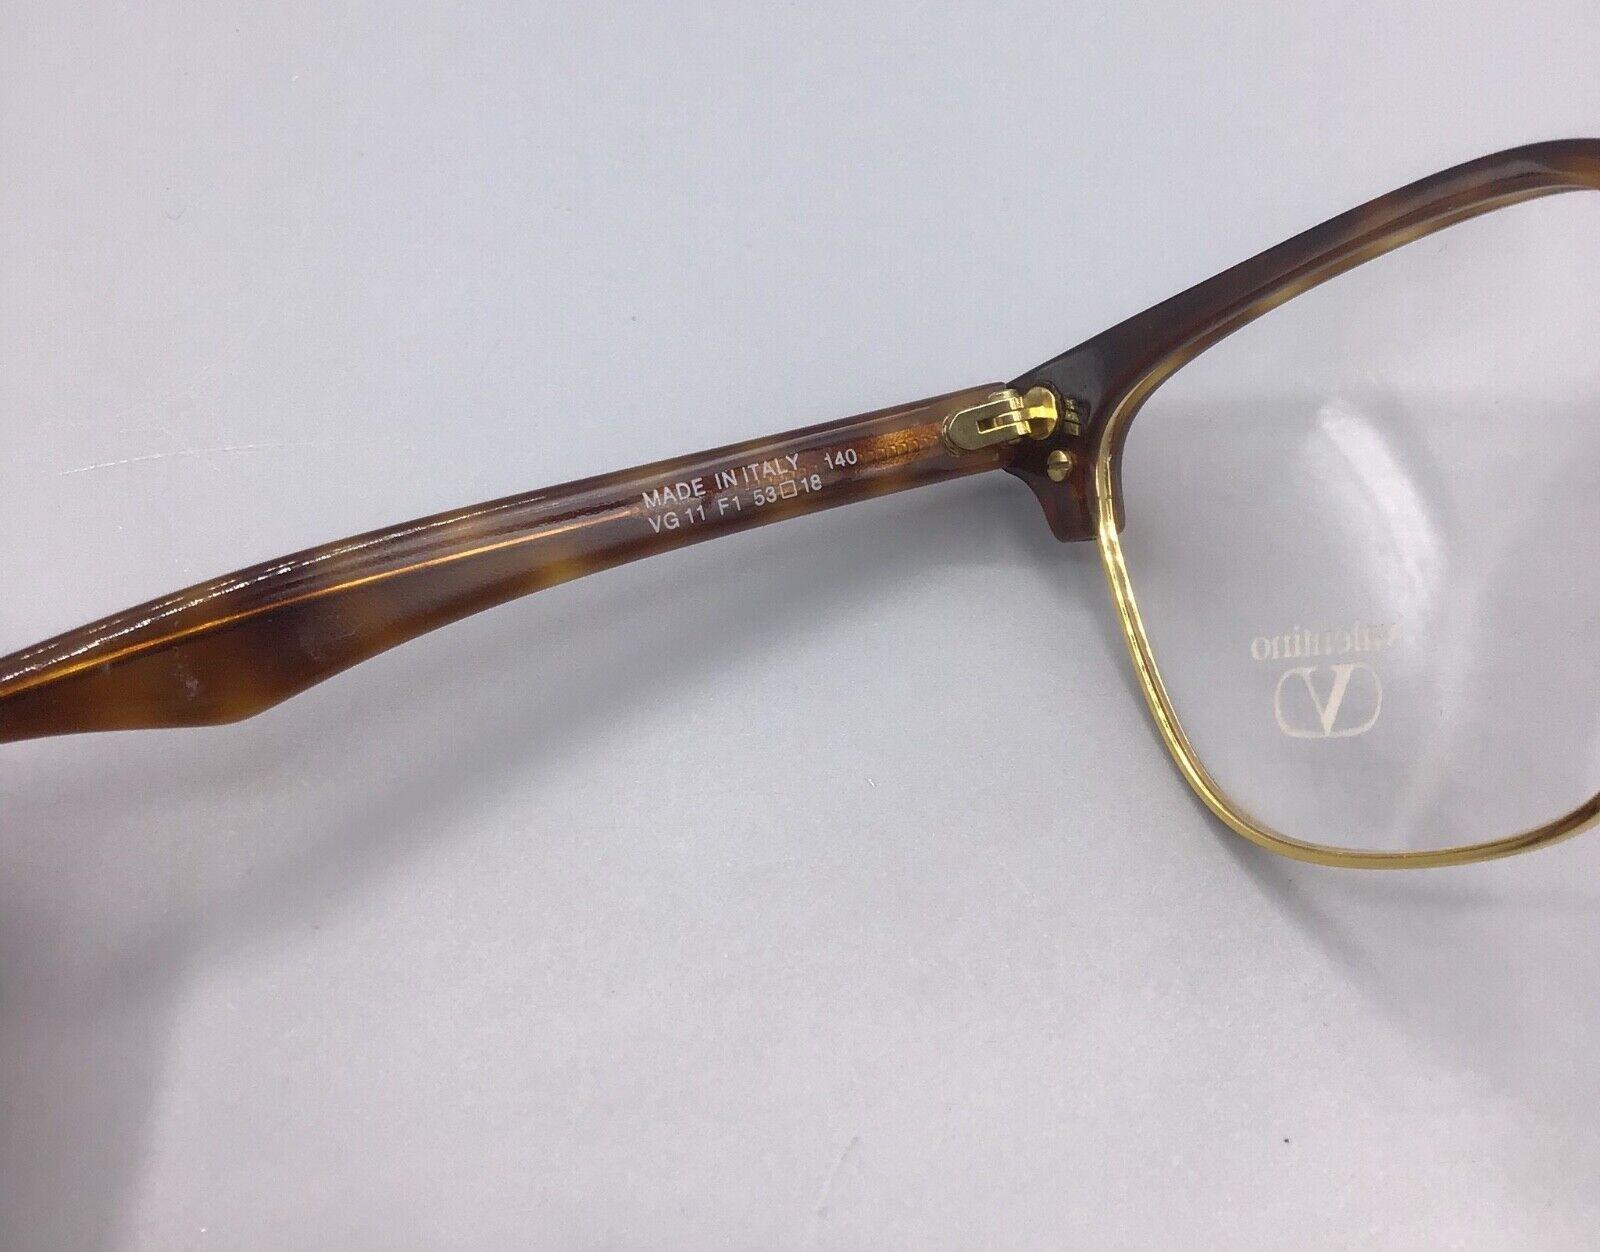 Valentino occhiale vintage VG11 F1 Made in Italy brillen lunettes